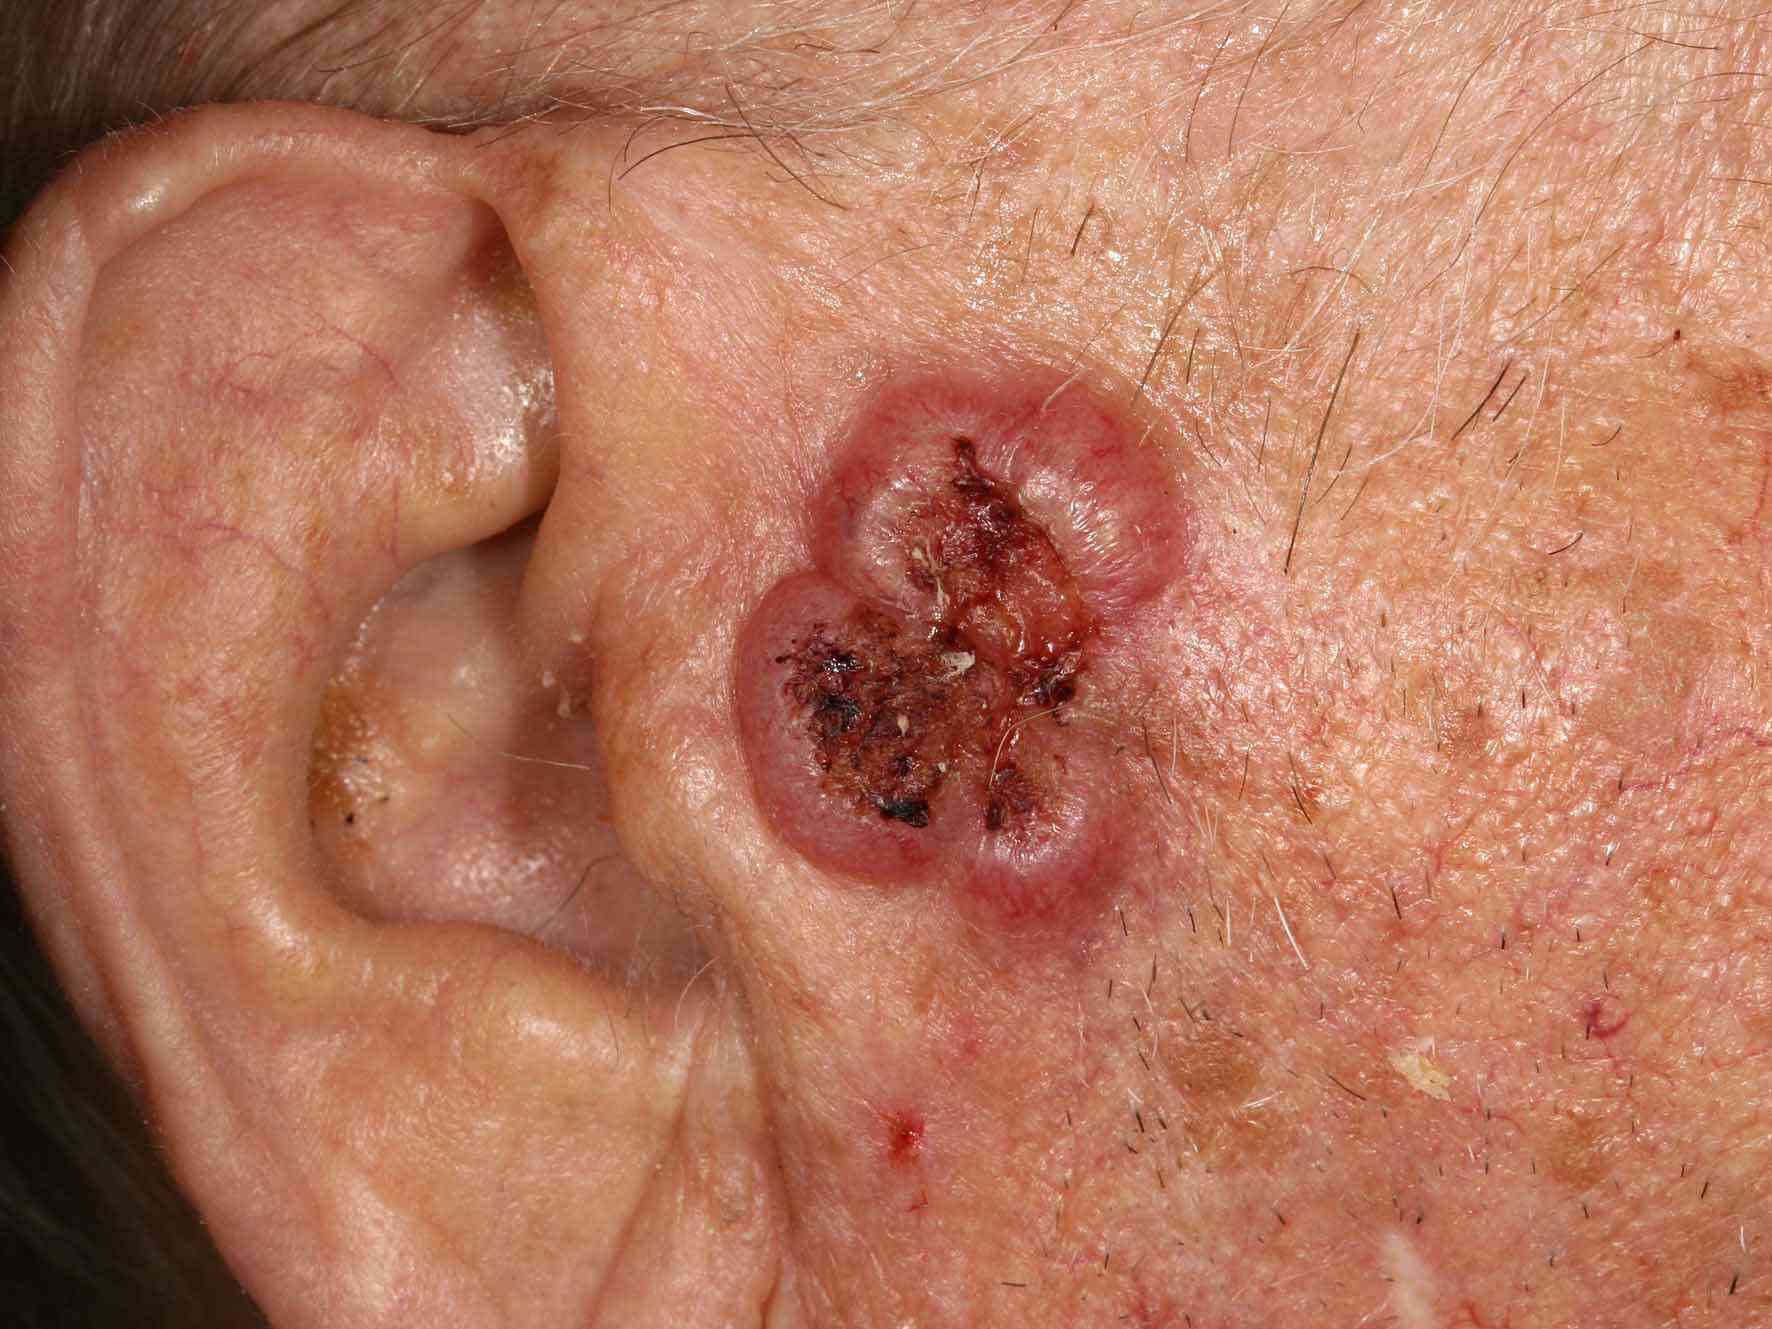 Squamous and Basal Cell Carcinoma Surgical Margins